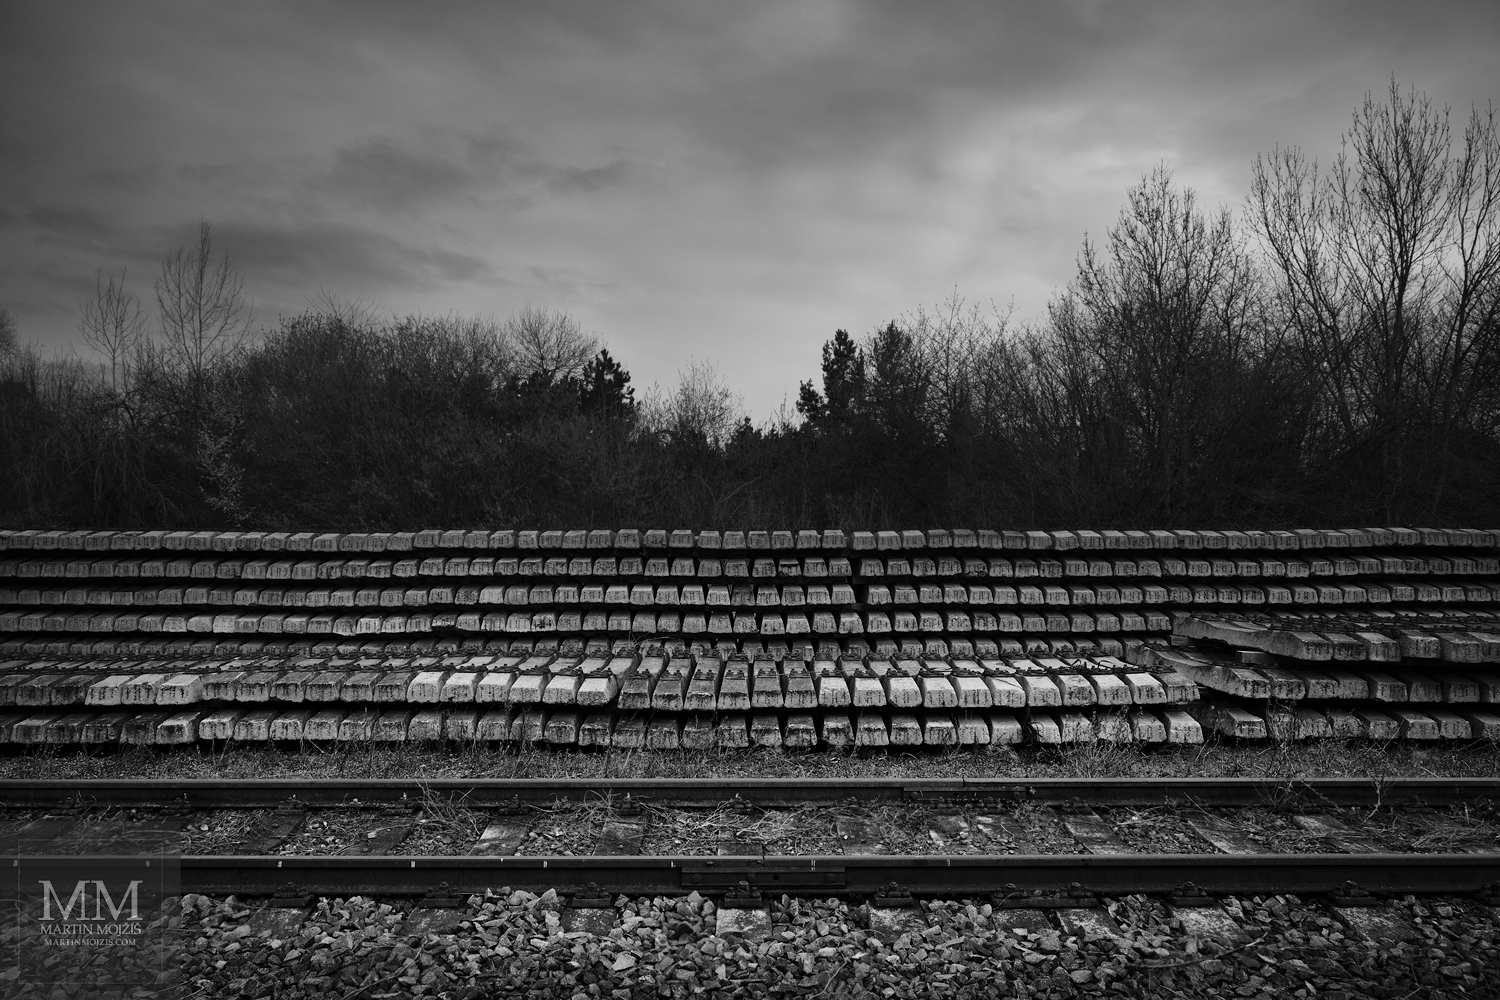 Many railroad ties (sleepers) next to the tracks. Fine art black and white photograph MANY TIES, photographed by Martin Mojzis.